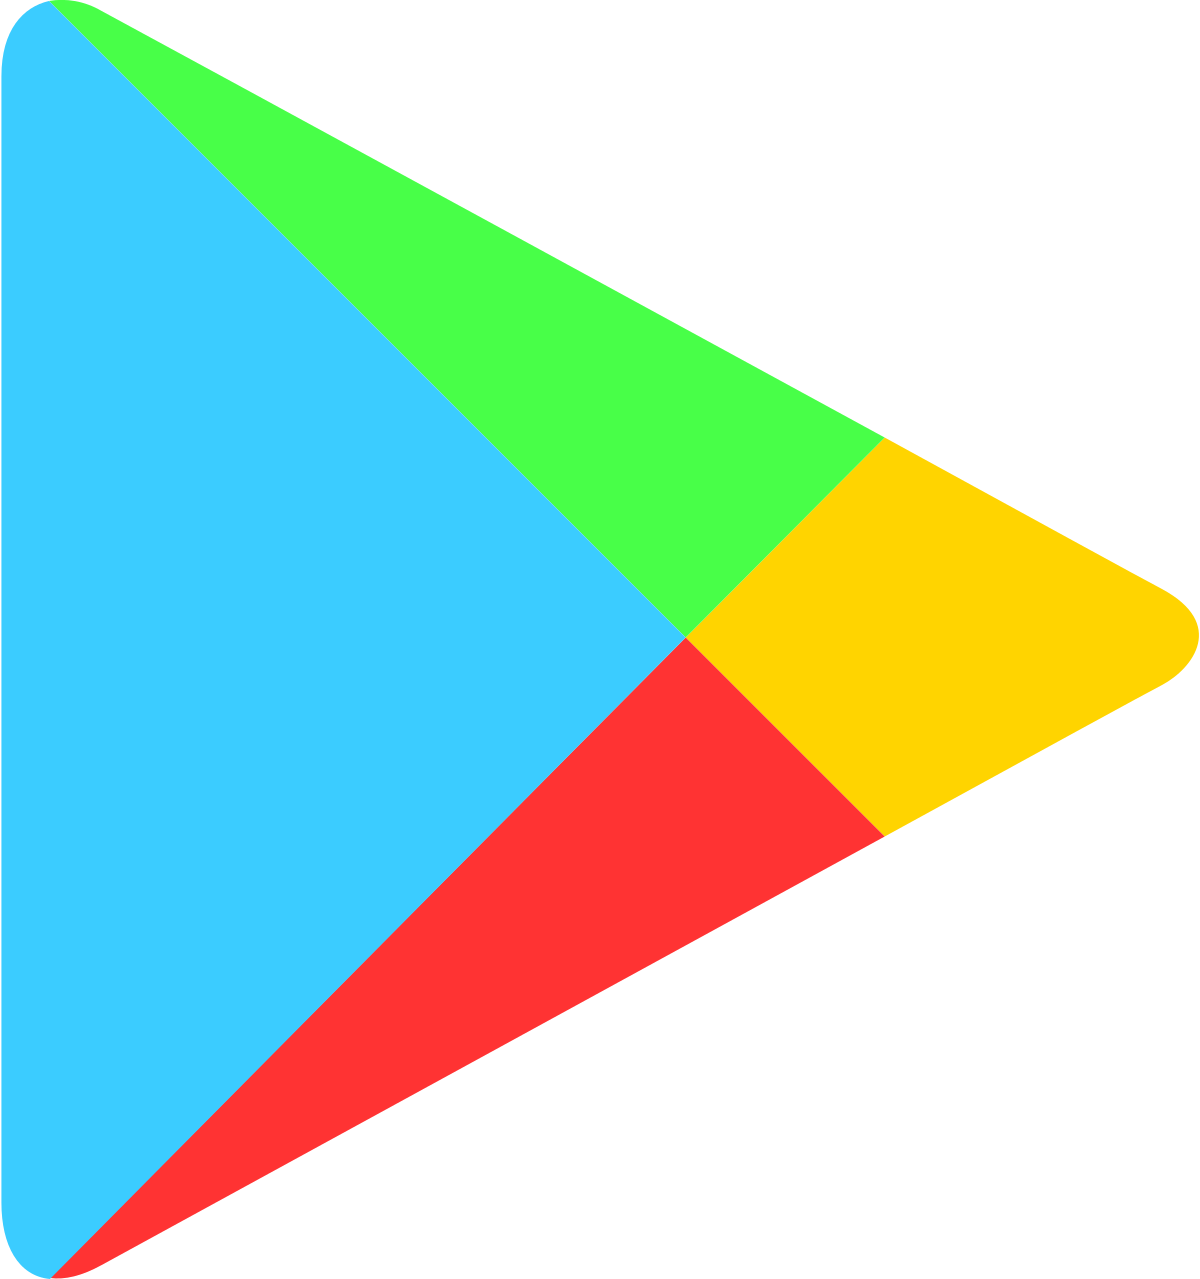 GOOGLE PLAY GIFT CARDS